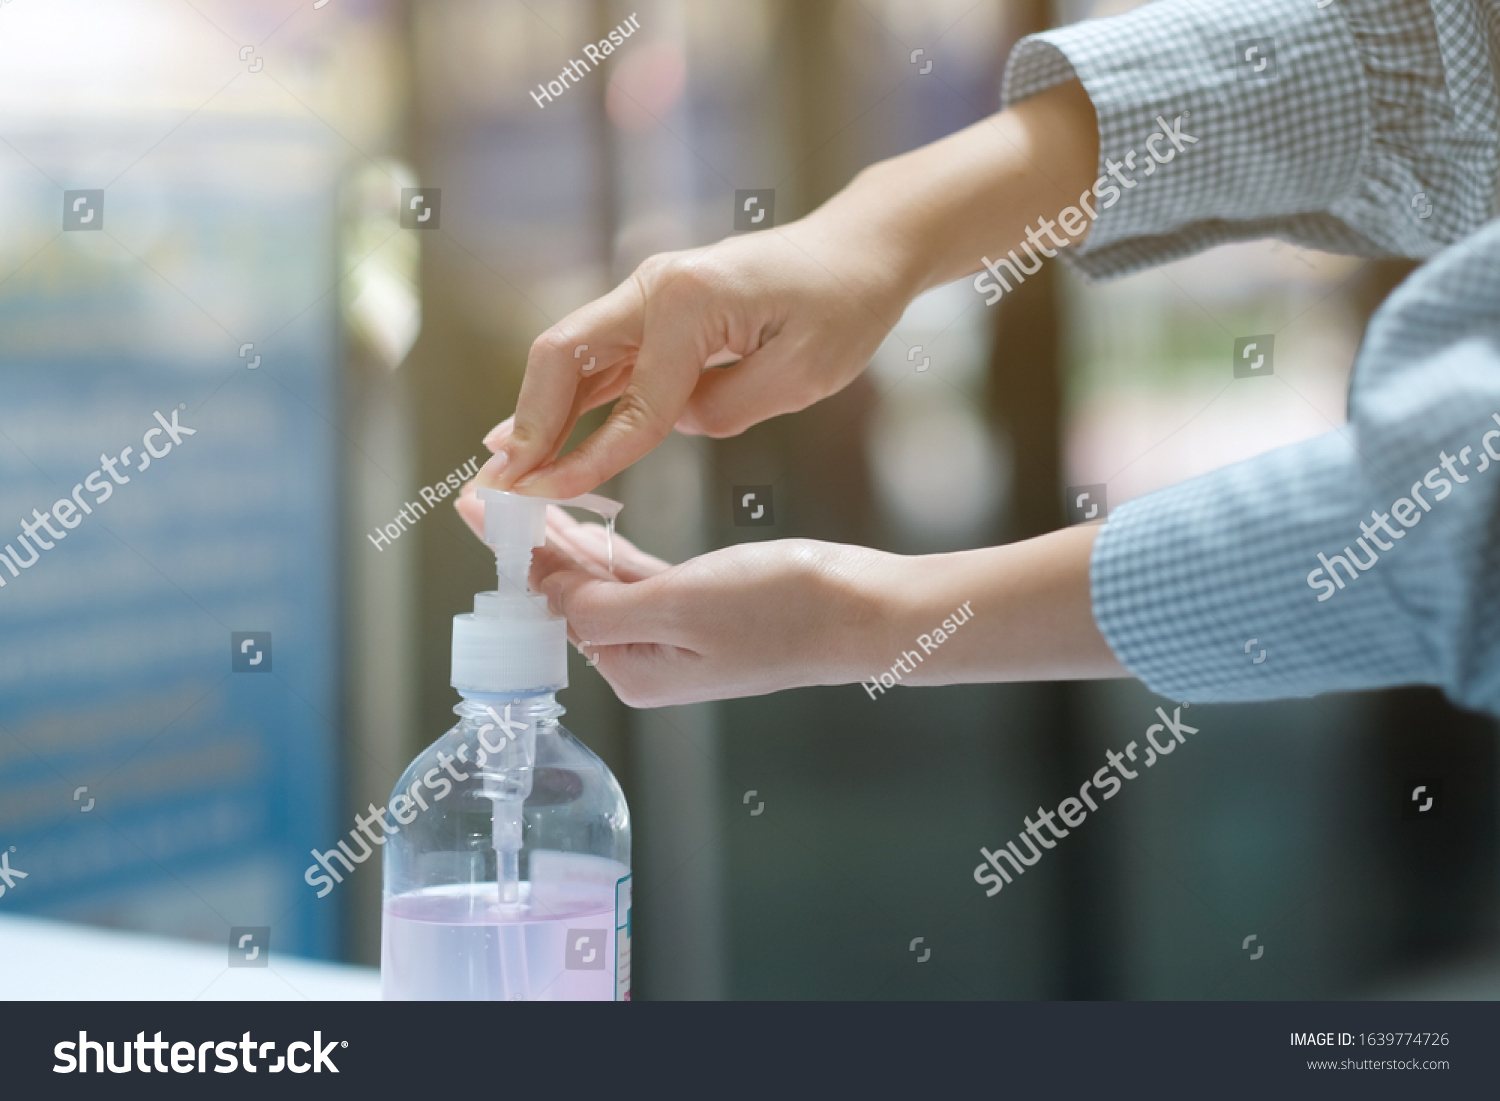 A girl using alcohol gel for cleaning hands #1639774726